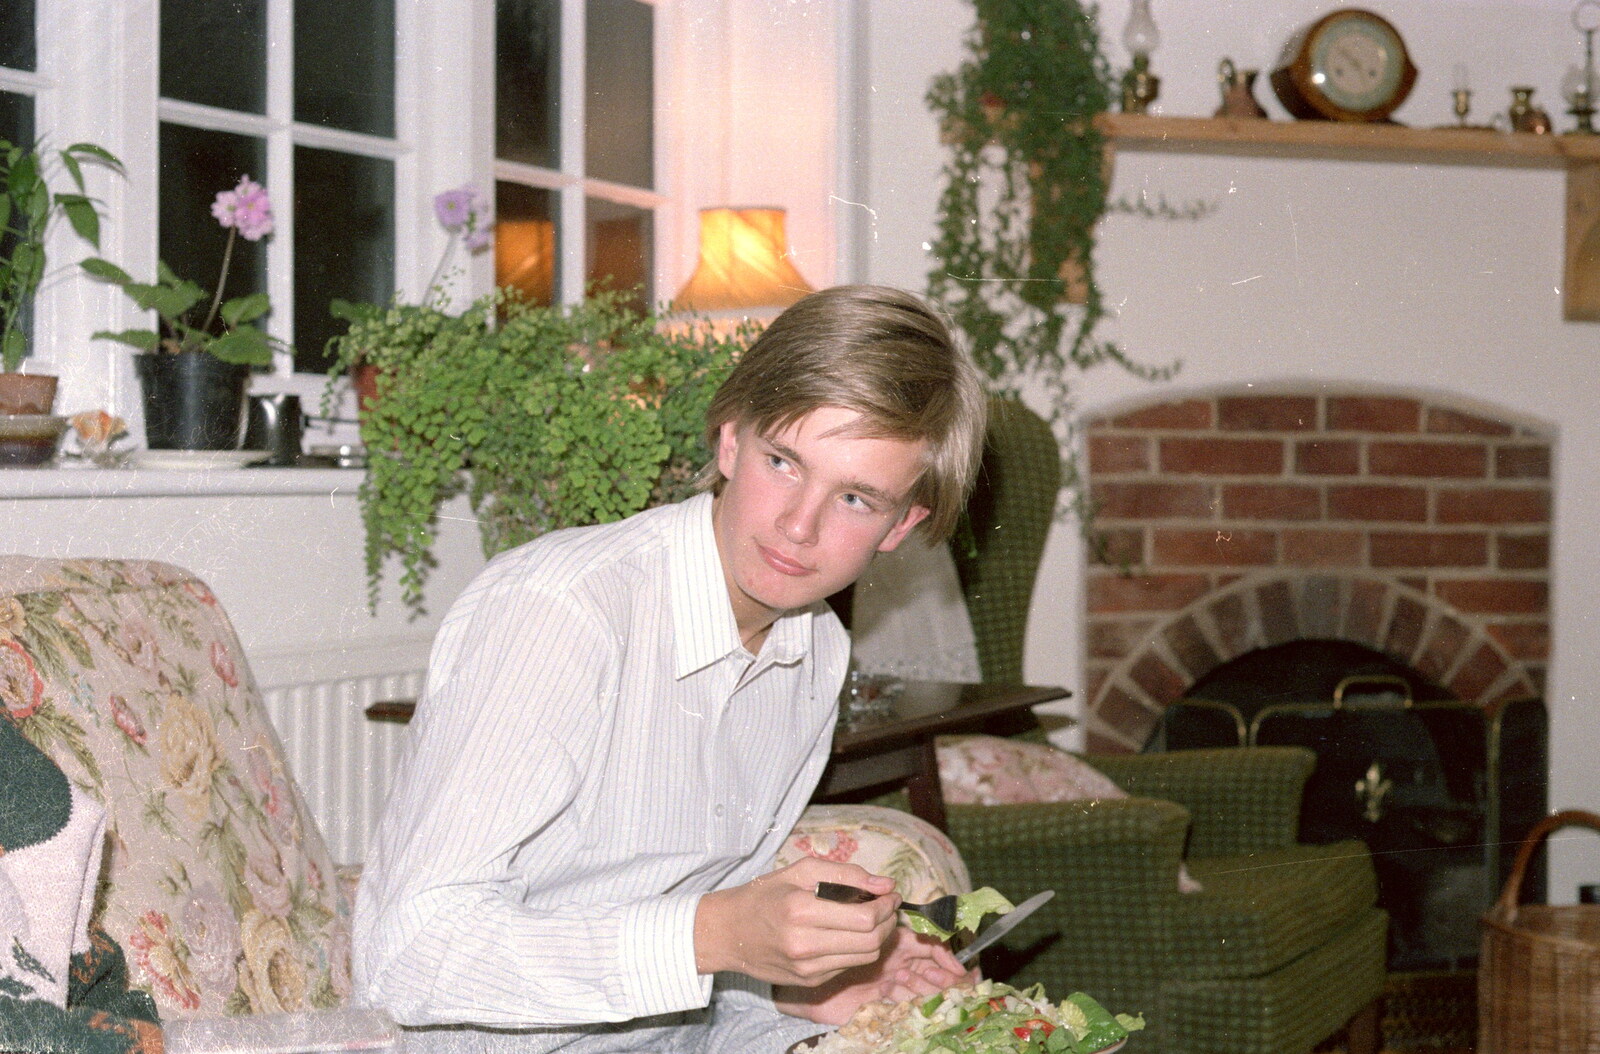 Nosher eats salad from The Last Day of Term, and Leaving New Milton, Hampshire - 18th September 1985